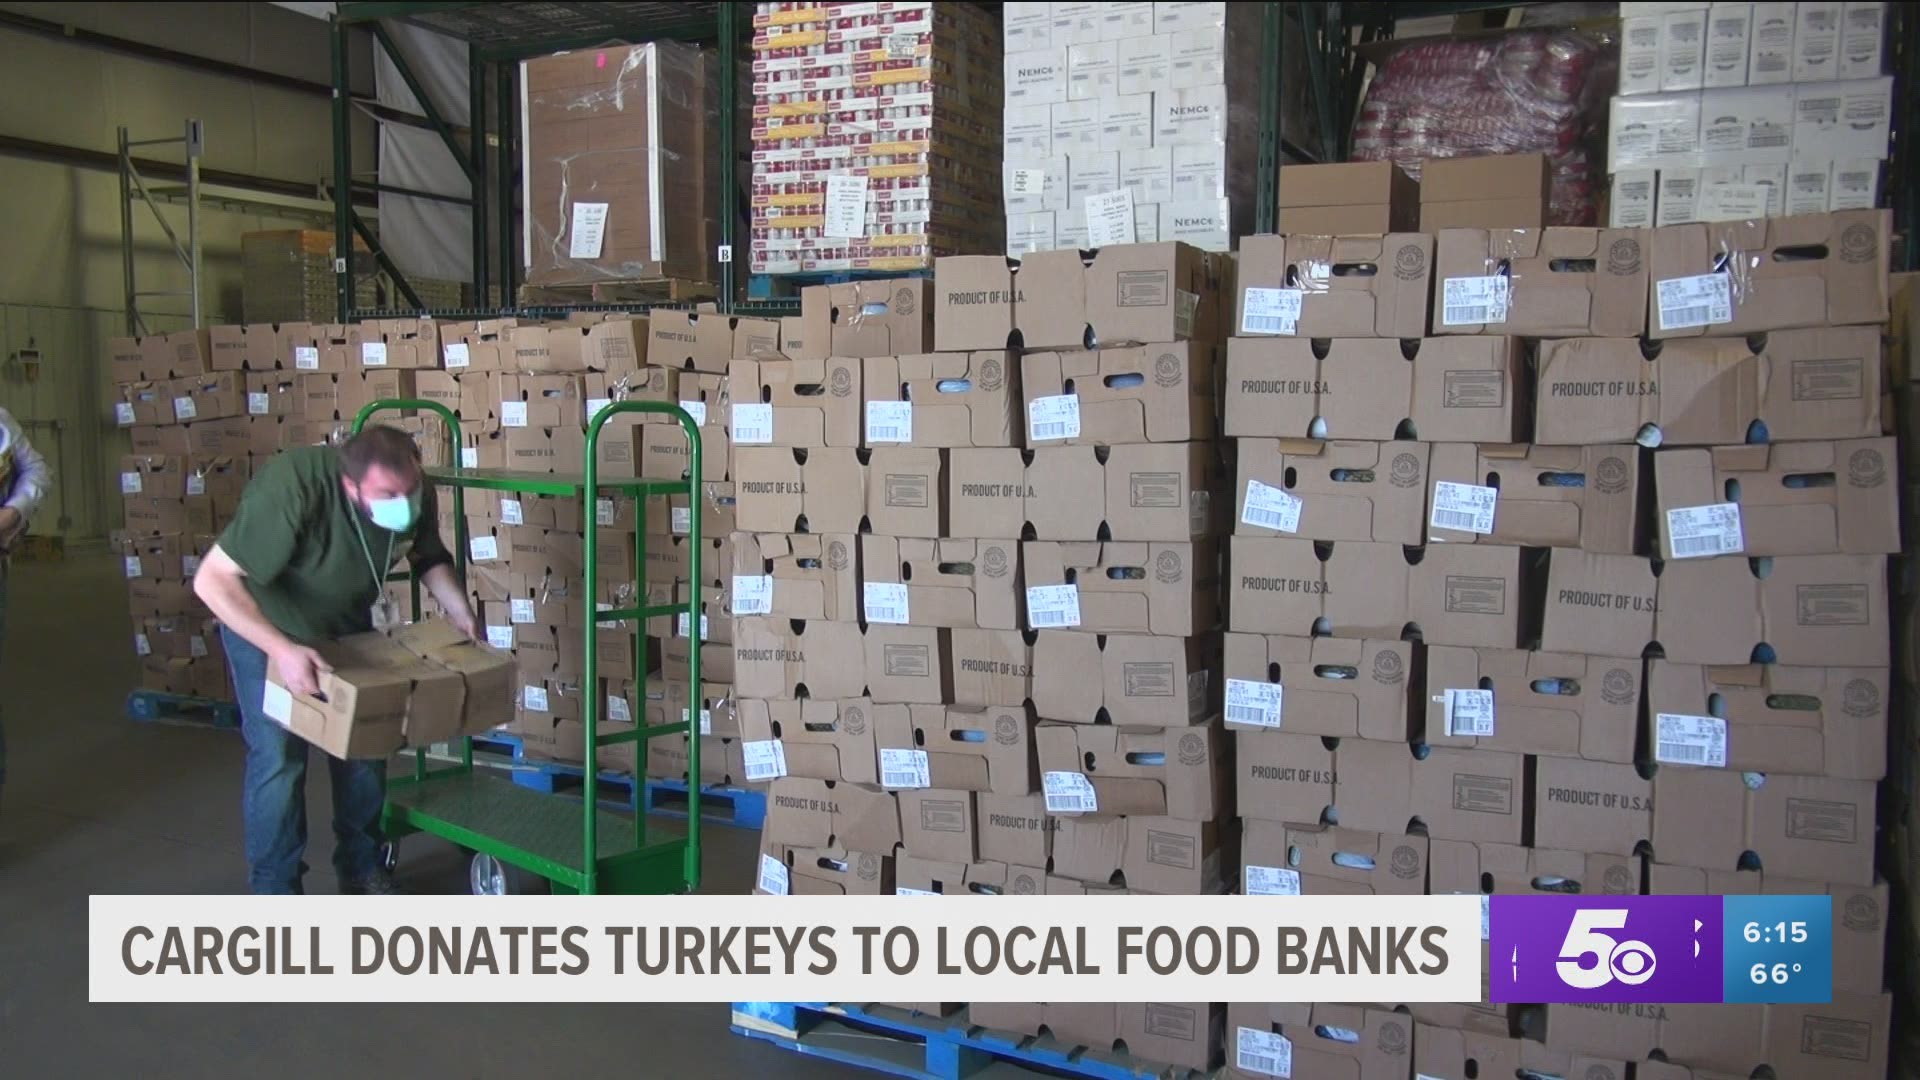 Cargill donated over 2,000 turkeys to each of the food banks and within the next few days will be shipping those birds to food pantries across the state.